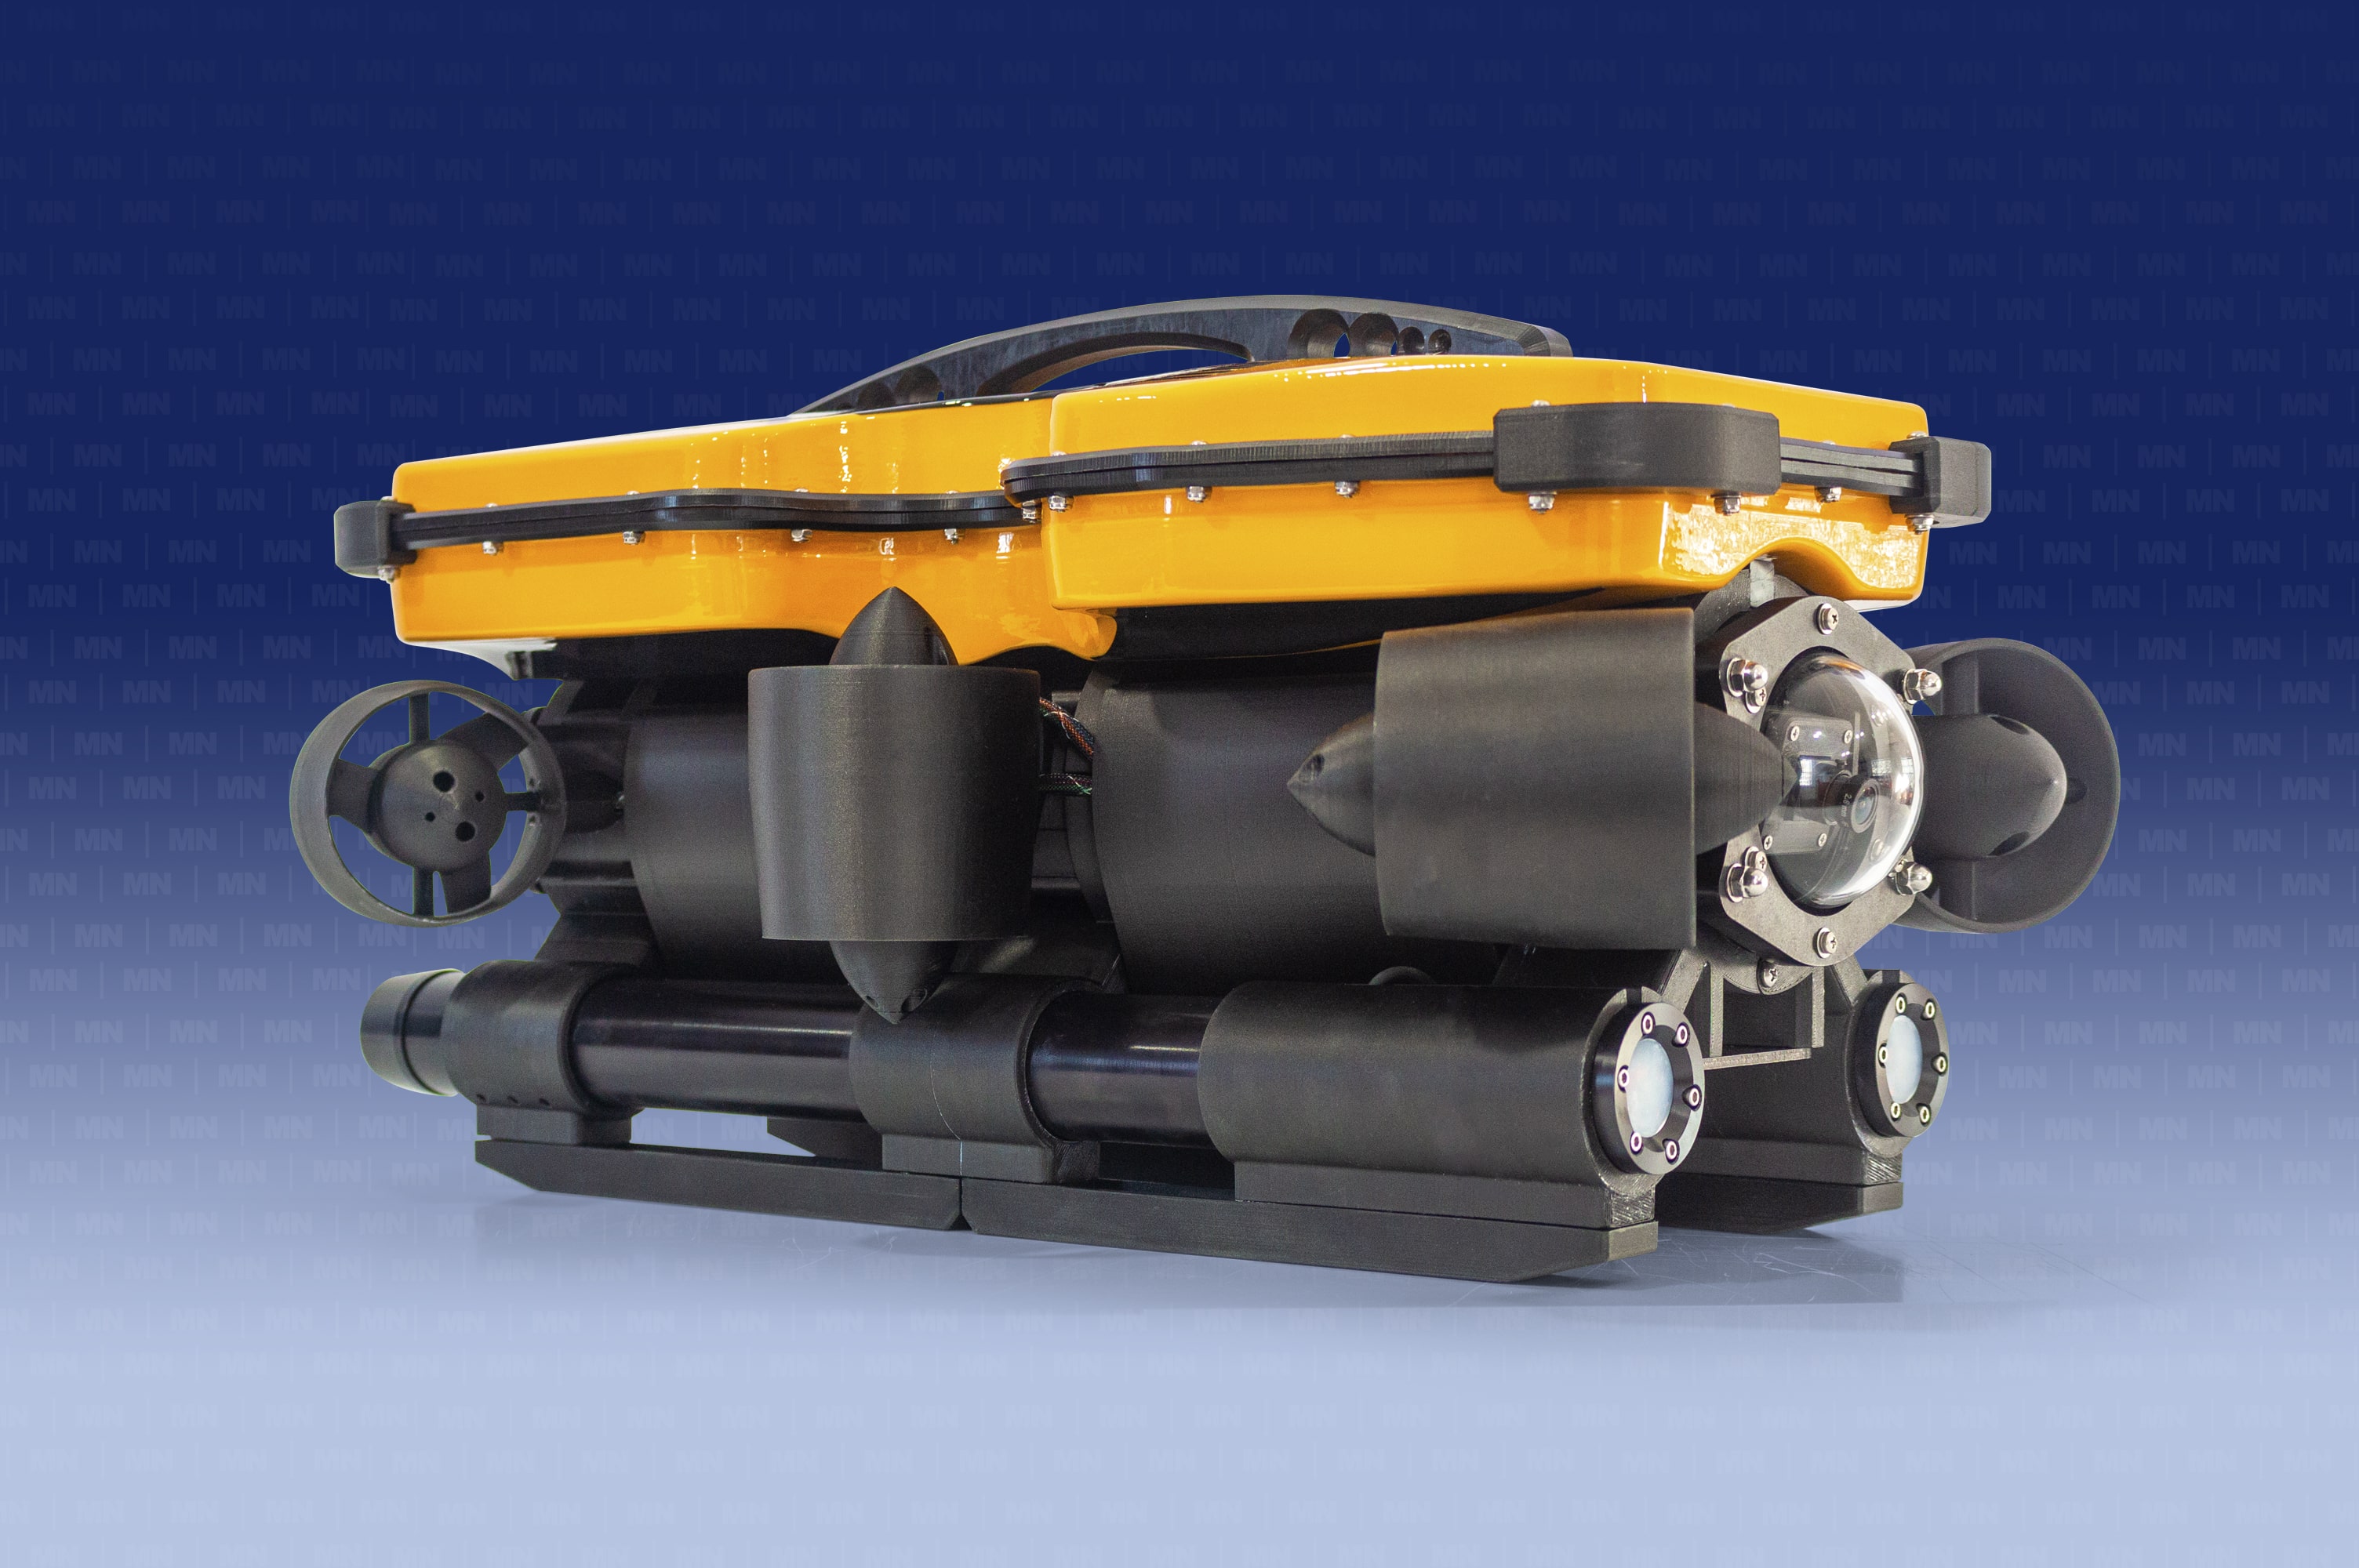 Weighing only 10.8 kg, this compact ROV can fit in a 12-inch diameter pipe, making it ideal for confined entry areas, and pipe and tank inspections, as well as general use